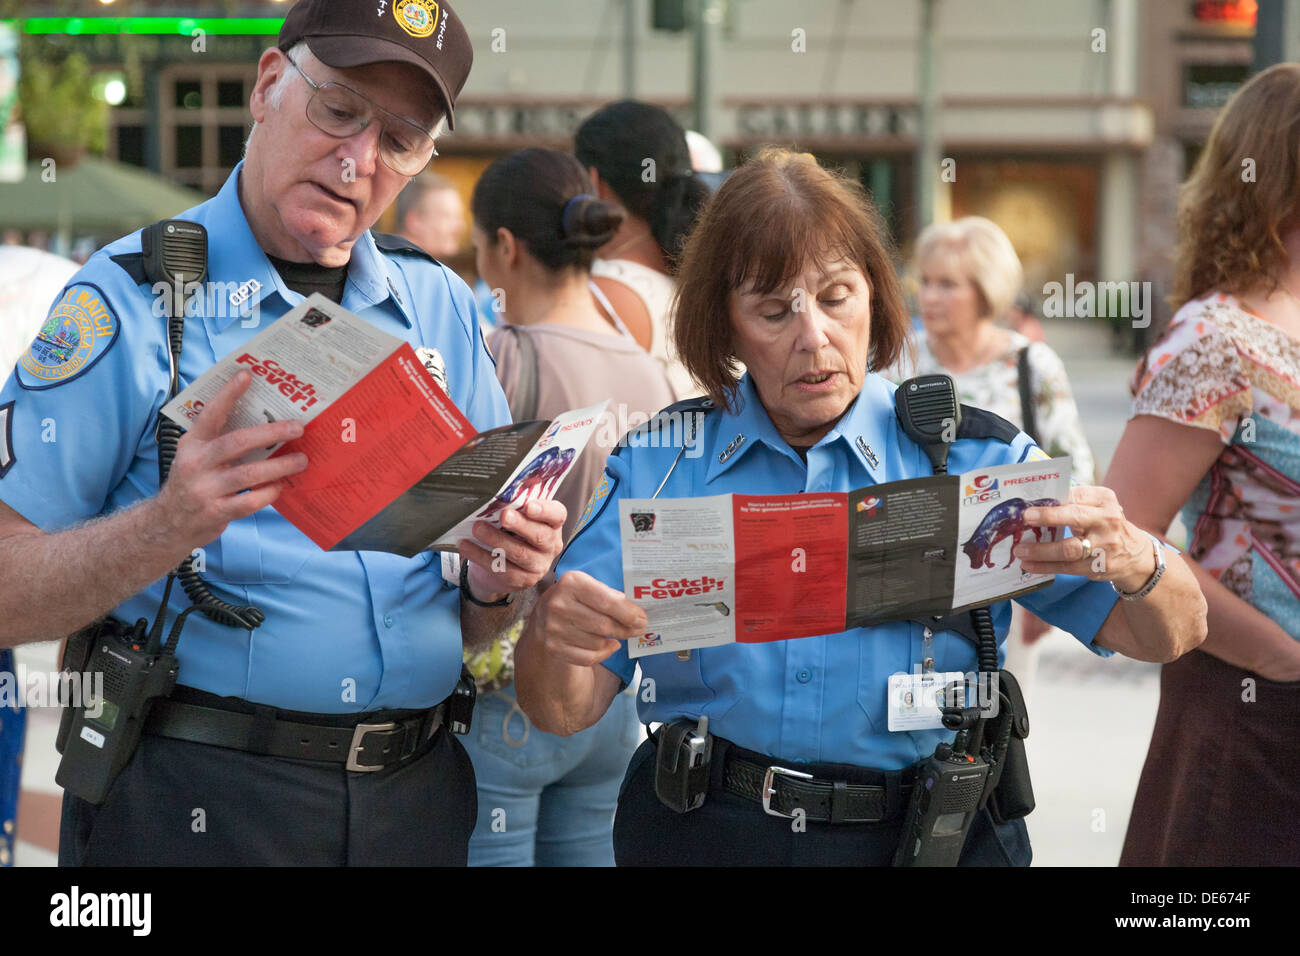 Two City Watch police officers reading Horse Fever brochures at public event in the downtown square of Ocala, Florida Stock Photo